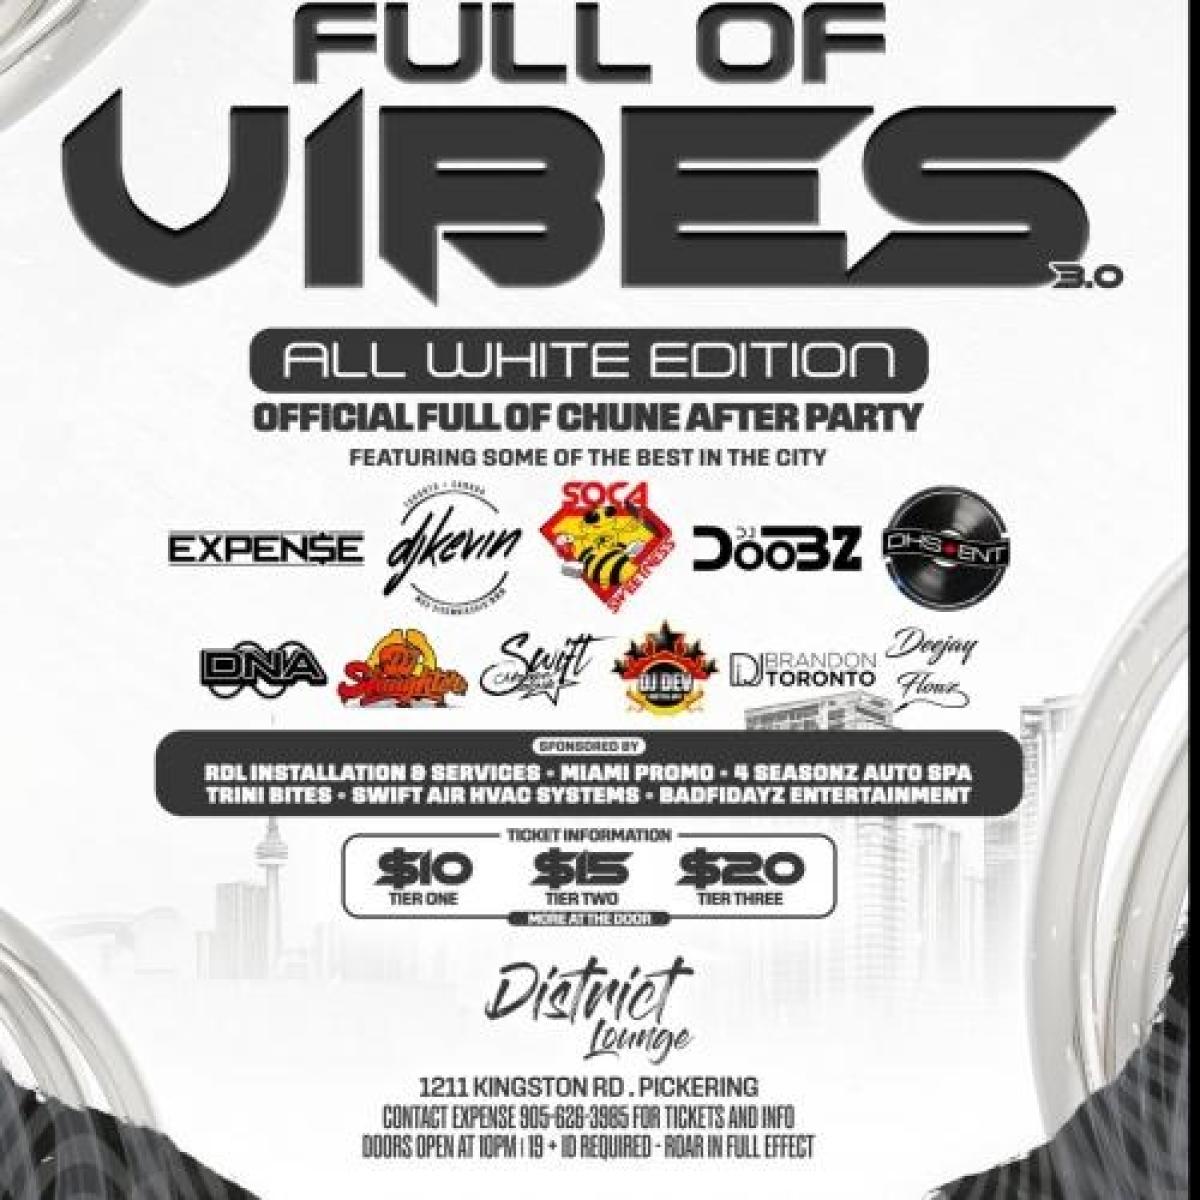 Full Of Vibes 3.0 flyer or graphic.